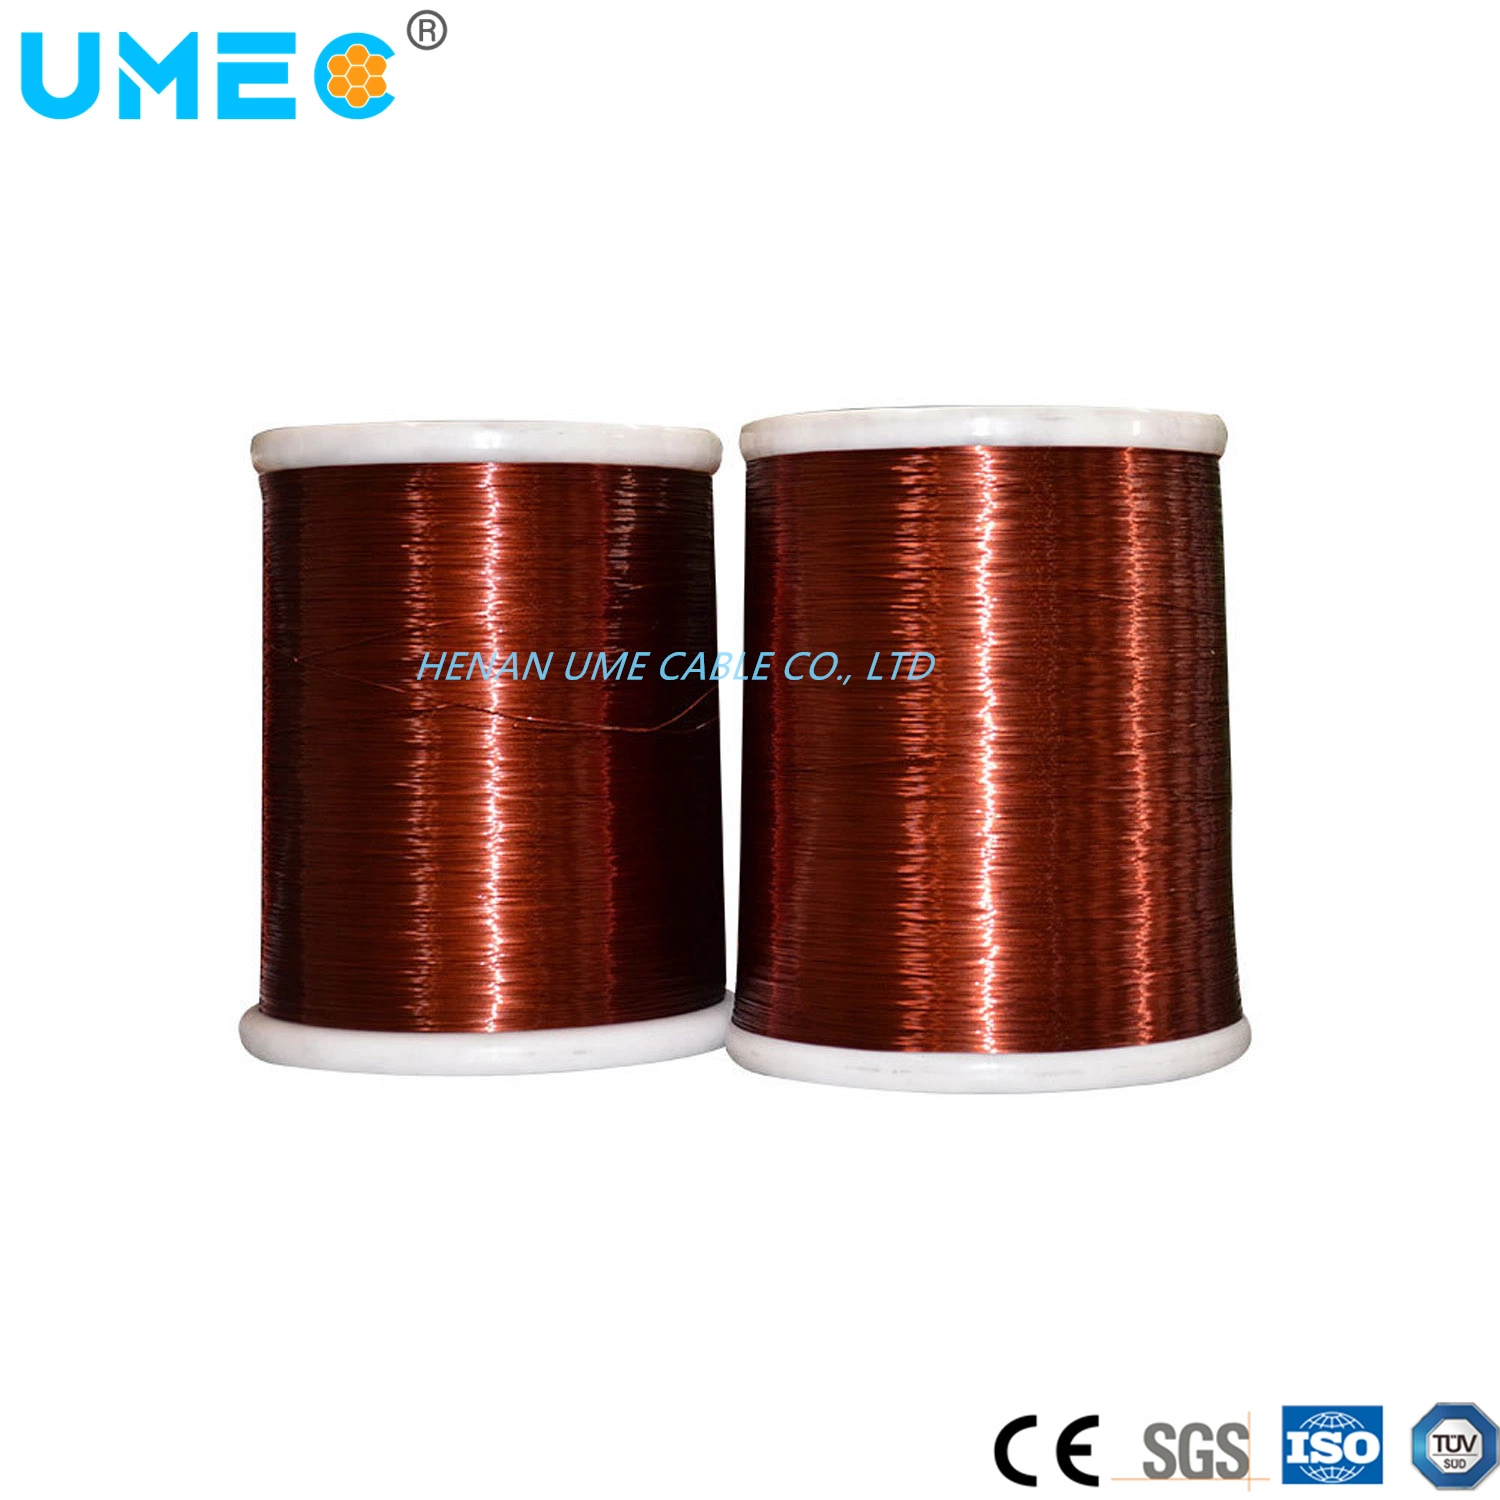 Enameled Wire Electrical Metallic Conductor Copper Clad Aluminium Wire 0.13mm 8-10% Enameled Wire Aluminum or Copper